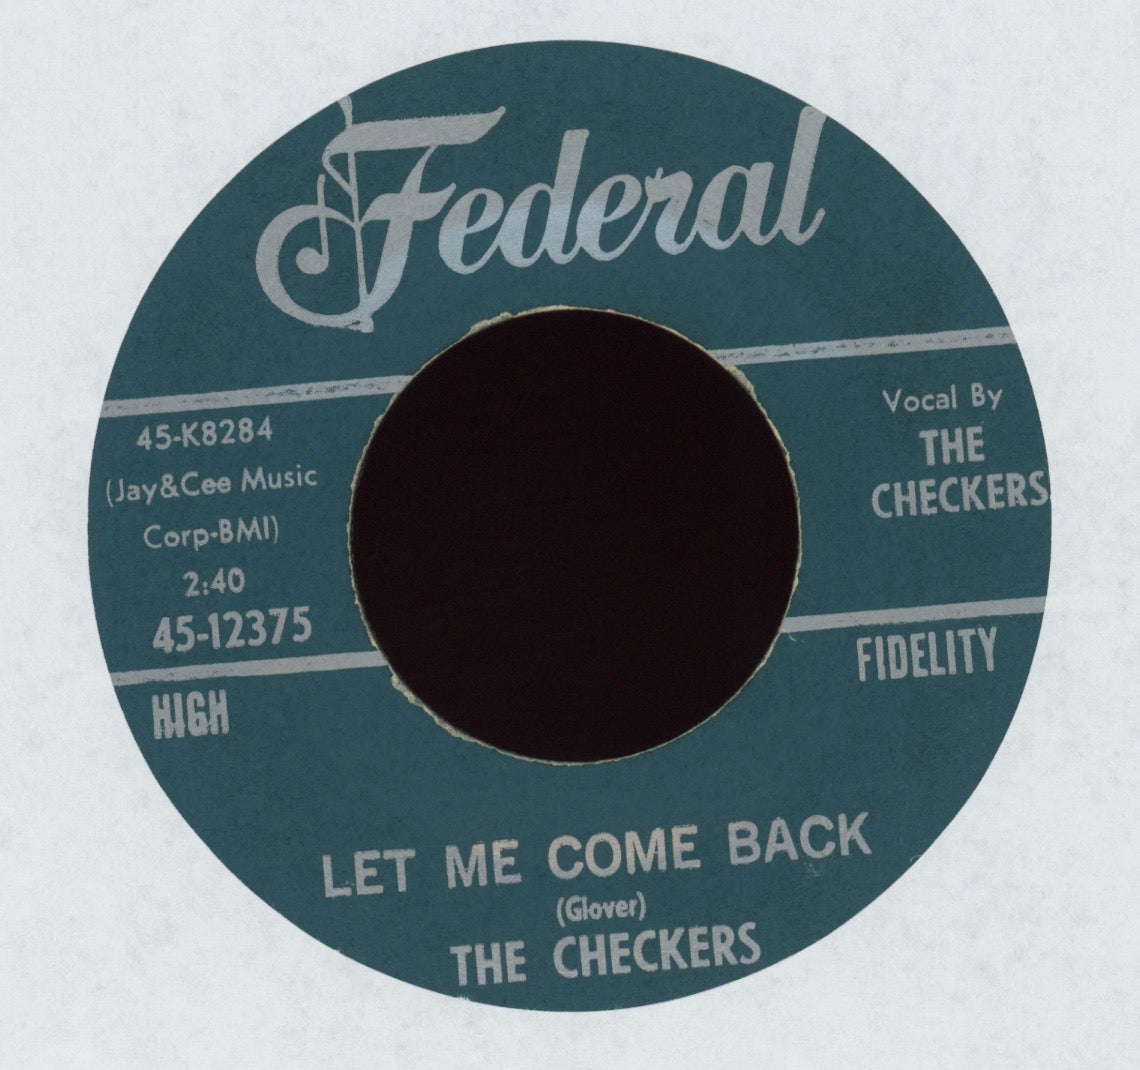 The Checkers - White Cliffs Of Dover on Federal